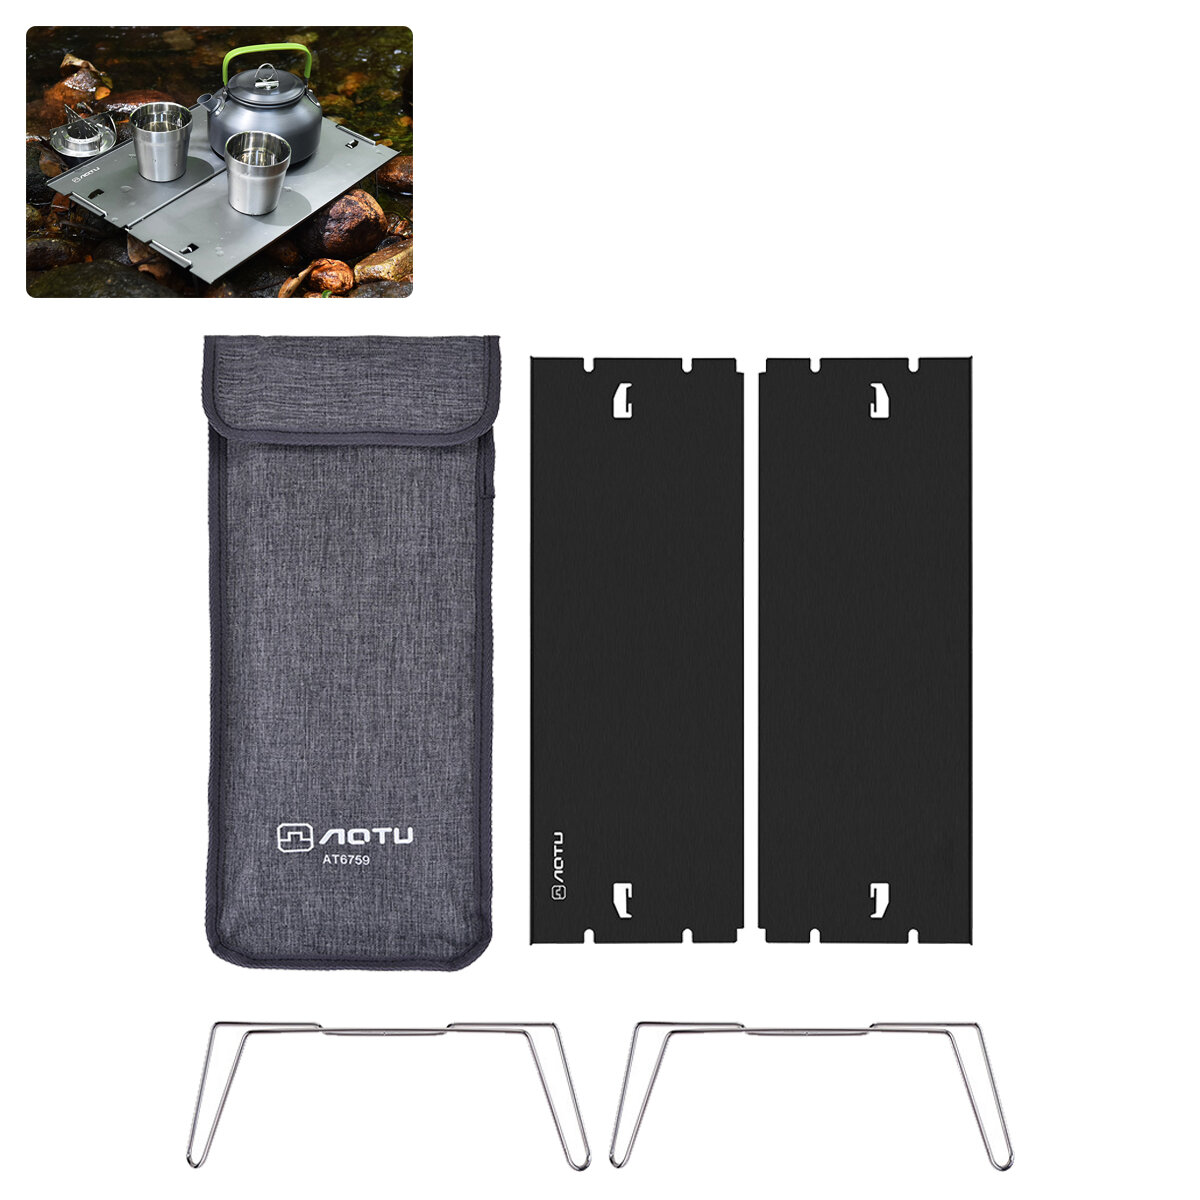 AOTU AT6759 Mini Folding Table Ultra-light Aluminum Detachable Portable Desk for Camping Picnic Beach Cooking with Bag